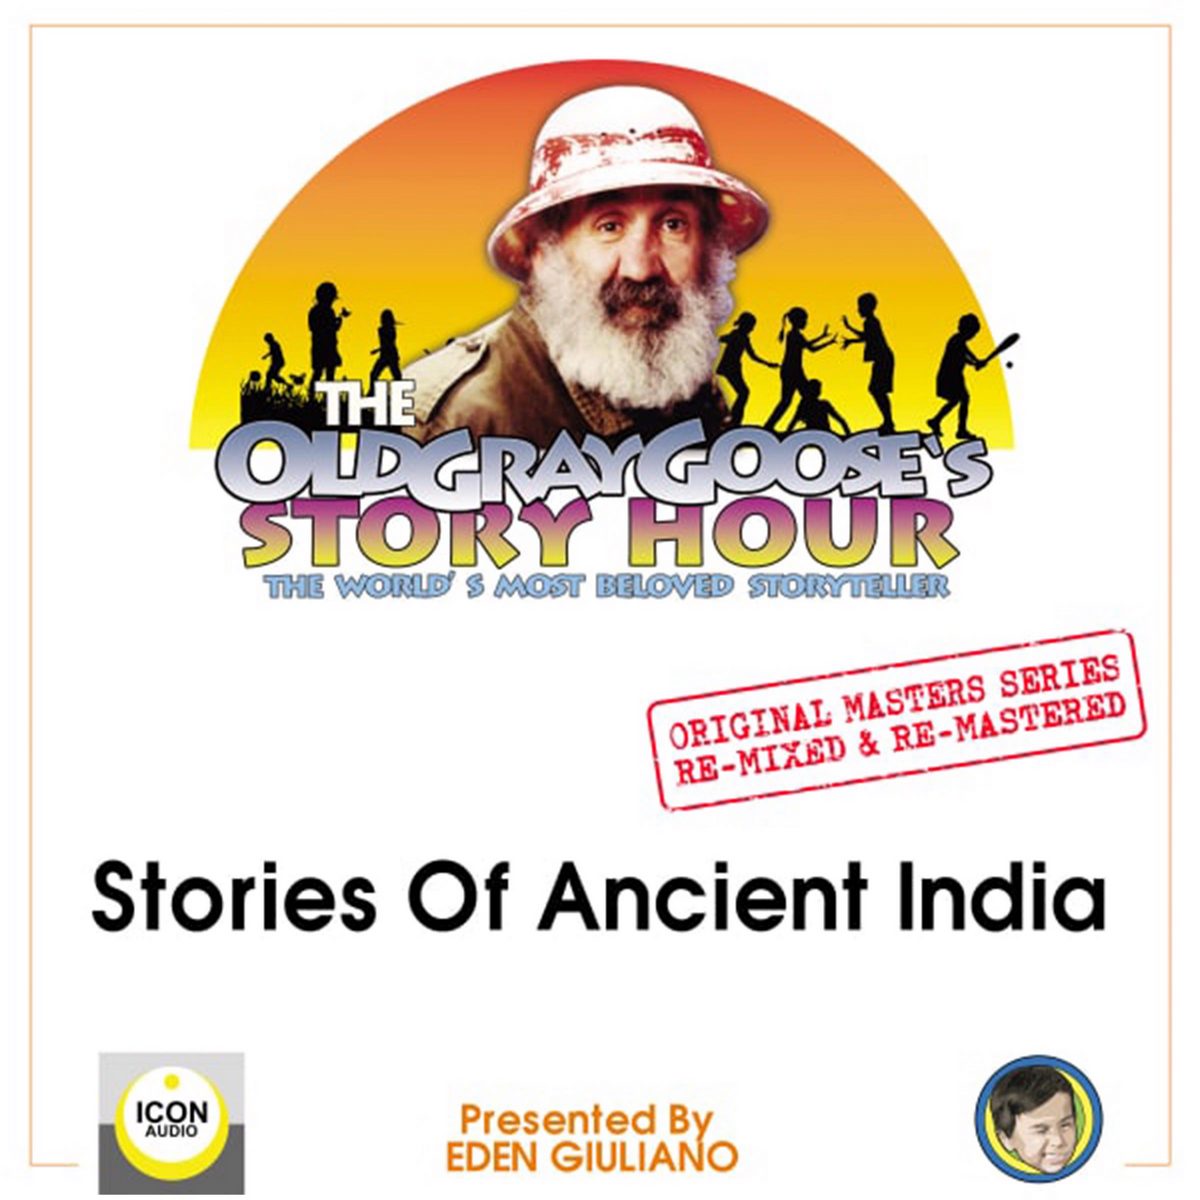 The Old Gray Goose’s Story Hour, The World’s Most Beloved Storyteller; Original Masters Series Re-mixed and Re-mastered; Stories of Ancient India